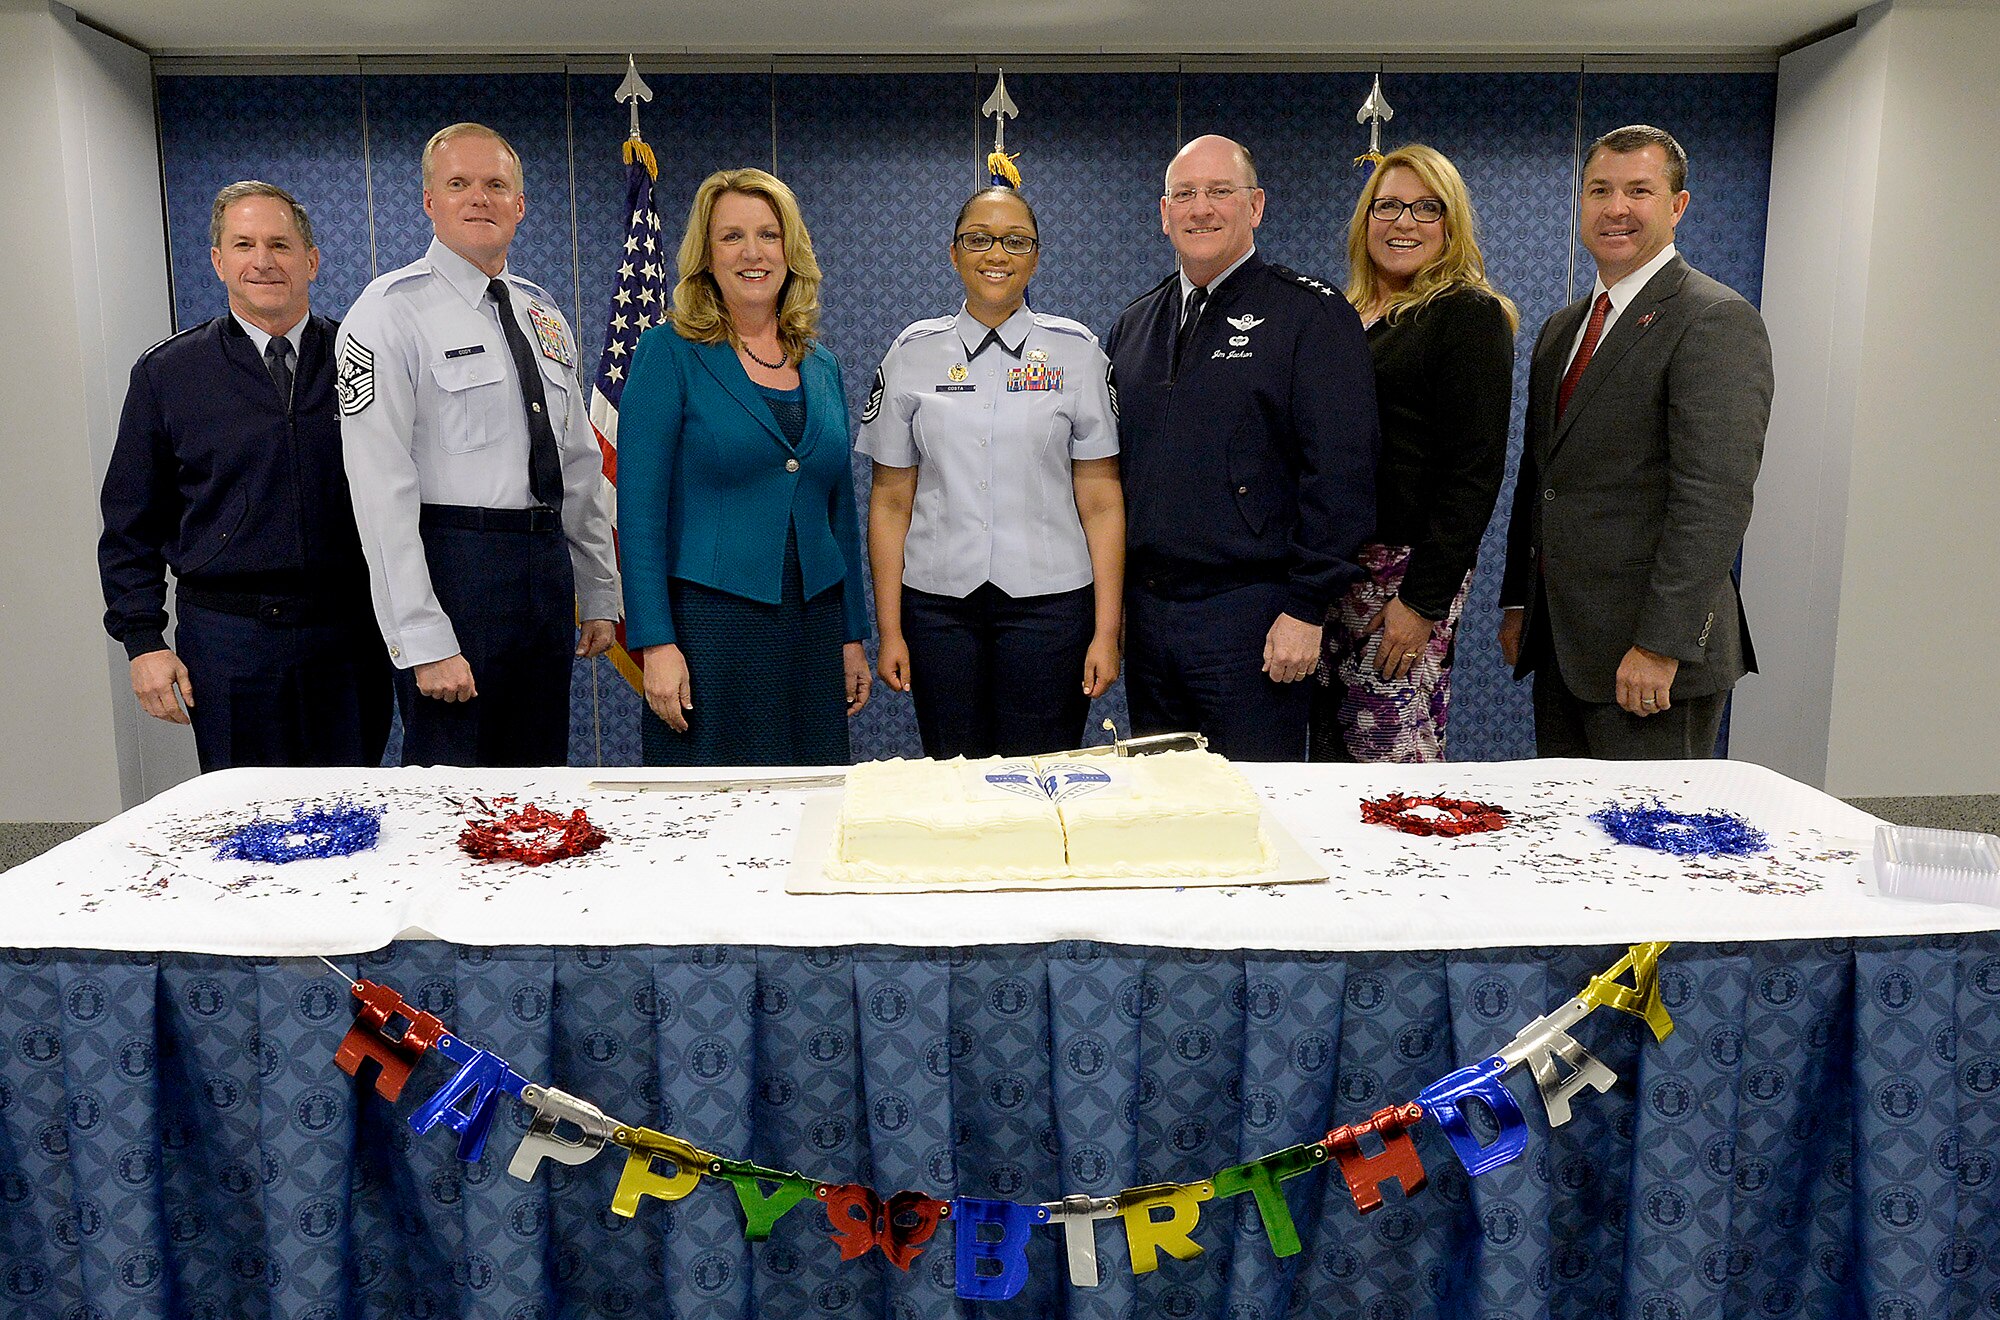 Celebrating the Air Force Reserve's 68th birthday during a April 14, 2016, Pentagon ceremony are, from left, Air Force Vice Chief of Staff Gen. David Goldfein, Chief Master Sgt. of the Air Force James A. Cody, Secretary of the Air Force Deborah Lee James, Master Sgt. Kandi Costa, Lt. Gen. James F. Jackson, Chief of Air Force Reserve and Commander, Air Force Reserve Command, radio personality Delilah, and Brian Ford.  Delilah and Ford are civic leaders for Air Force Reserve Command.  (U.S/ Air Force photo/Scott M. Ash)